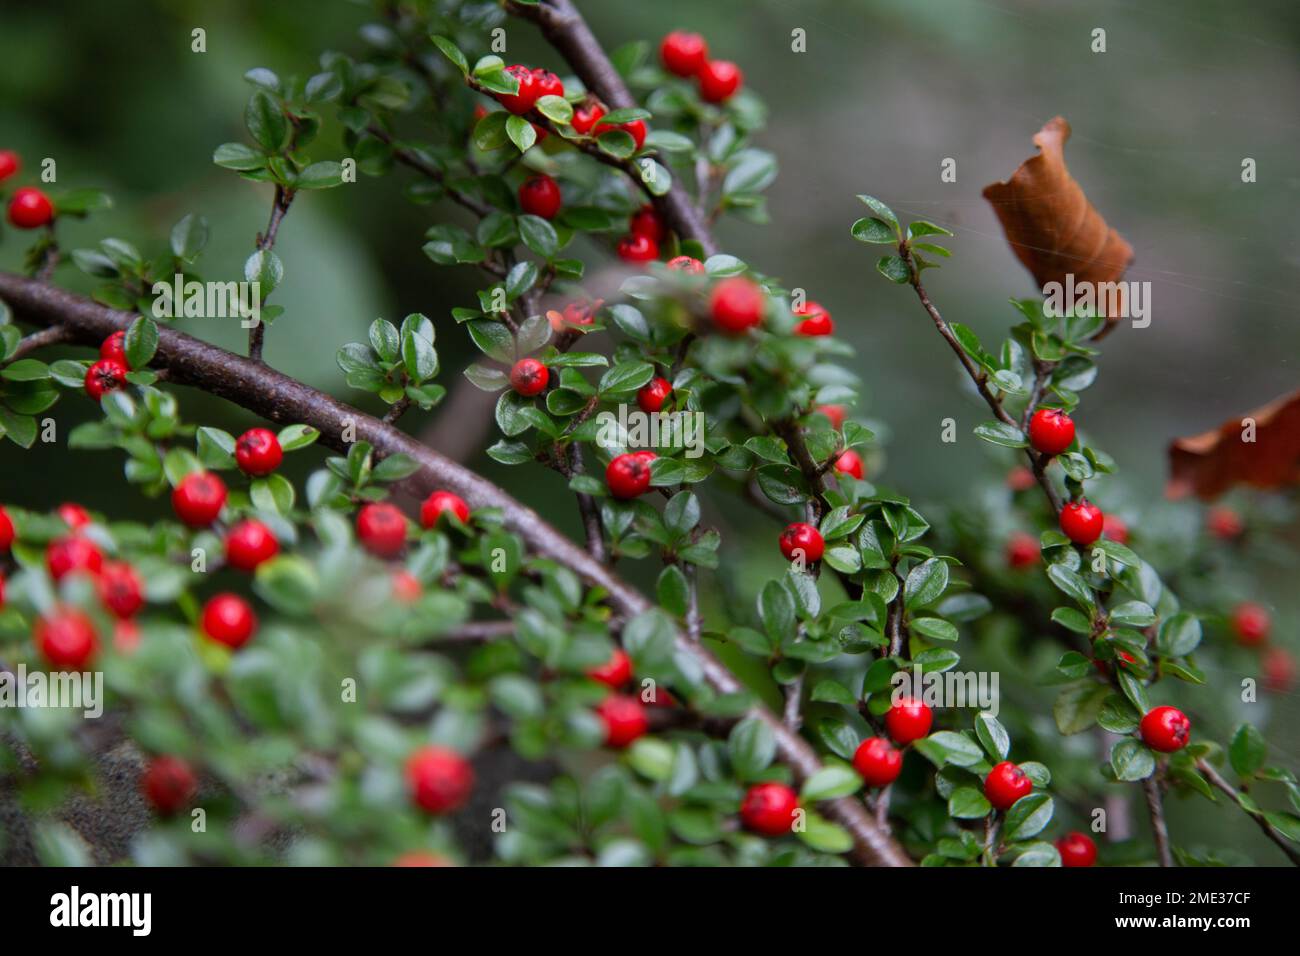 A selective focus shot of highbush cranberry with ripe red berries and green leaves Stock Photo